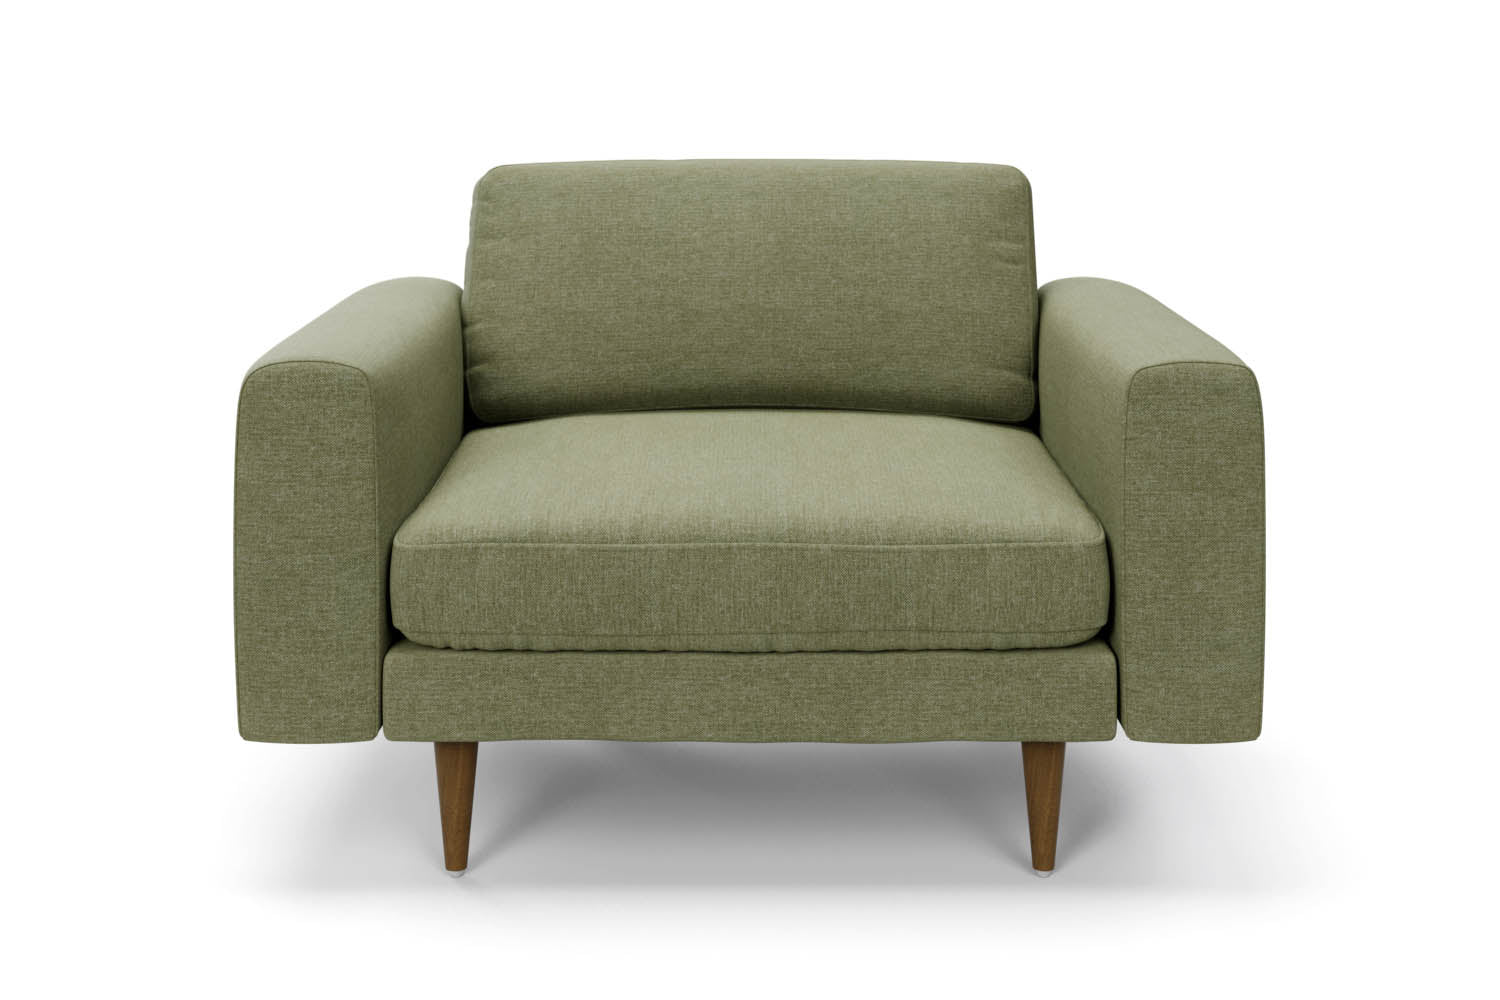 The Big Chill Snuggler in Sage Chenille with brown legs front variant_40886316957744